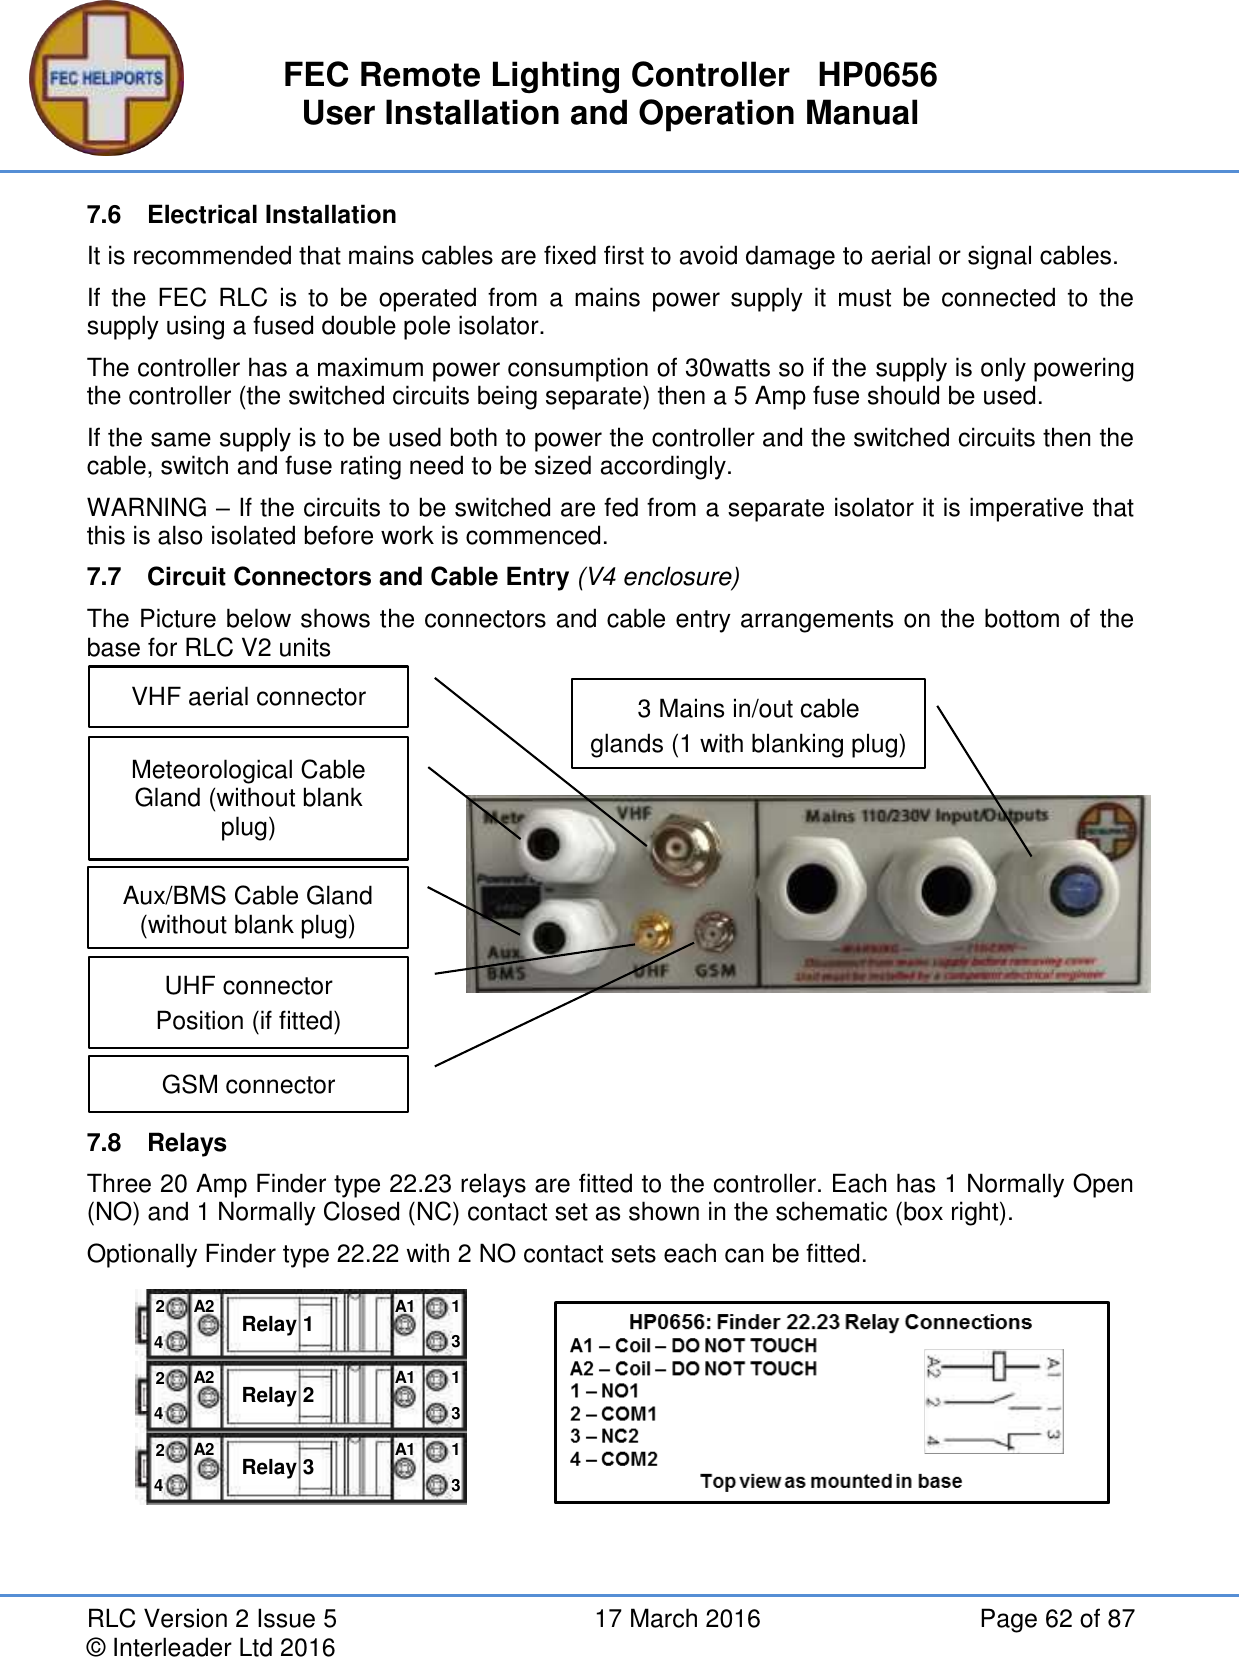 FEC Remote Lighting Controller   HP0656 User Installation and Operation Manual RLC Version 2 Issue 5  17 March 2016  Page 62 of 87 © Interleader Ltd 2016 7.6  Electrical Installation It is recommended that mains cables are fixed first to avoid damage to aerial or signal cables. If  the  FEC  RLC  is  to be  operated  from  a mains  power supply it  must be  connected  to  the supply using a fused double pole isolator. The controller has a maximum power consumption of 30watts so if the supply is only powering the controller (the switched circuits being separate) then a 5 Amp fuse should be used. If the same supply is to be used both to power the controller and the switched circuits then the cable, switch and fuse rating need to be sized accordingly. WARNING – If the circuits to be switched are fed from a separate isolator it is imperative that this is also isolated before work is commenced. 7.7  Circuit Connectors and Cable Entry (V4 enclosure) The Picture below shows the connectors and cable entry arrangements on the bottom of the base for RLC V2 units            7.8  Relays Three 20 Amp Finder type 22.23 relays are fitted to the controller. Each has 1 Normally Open (NO) and 1 Normally Closed (NC) contact set as shown in the schematic (box right).   Optionally Finder type 22.22 with 2 NO contact sets each can be fitted.   Relay 1 A2 A1 4 2 1 3 Relay 2 A2 A1 4 2 1 3 Relay 3 A2 A1 4 2 1 3 VHF aerial connector UHF connector Position (if fitted)  Meteorological Cable Gland (without blank plug) 3 Mains in/out cable glands (1 with blanking plug) GSM connector  Aux/BMS Cable Gland (without blank plug) 